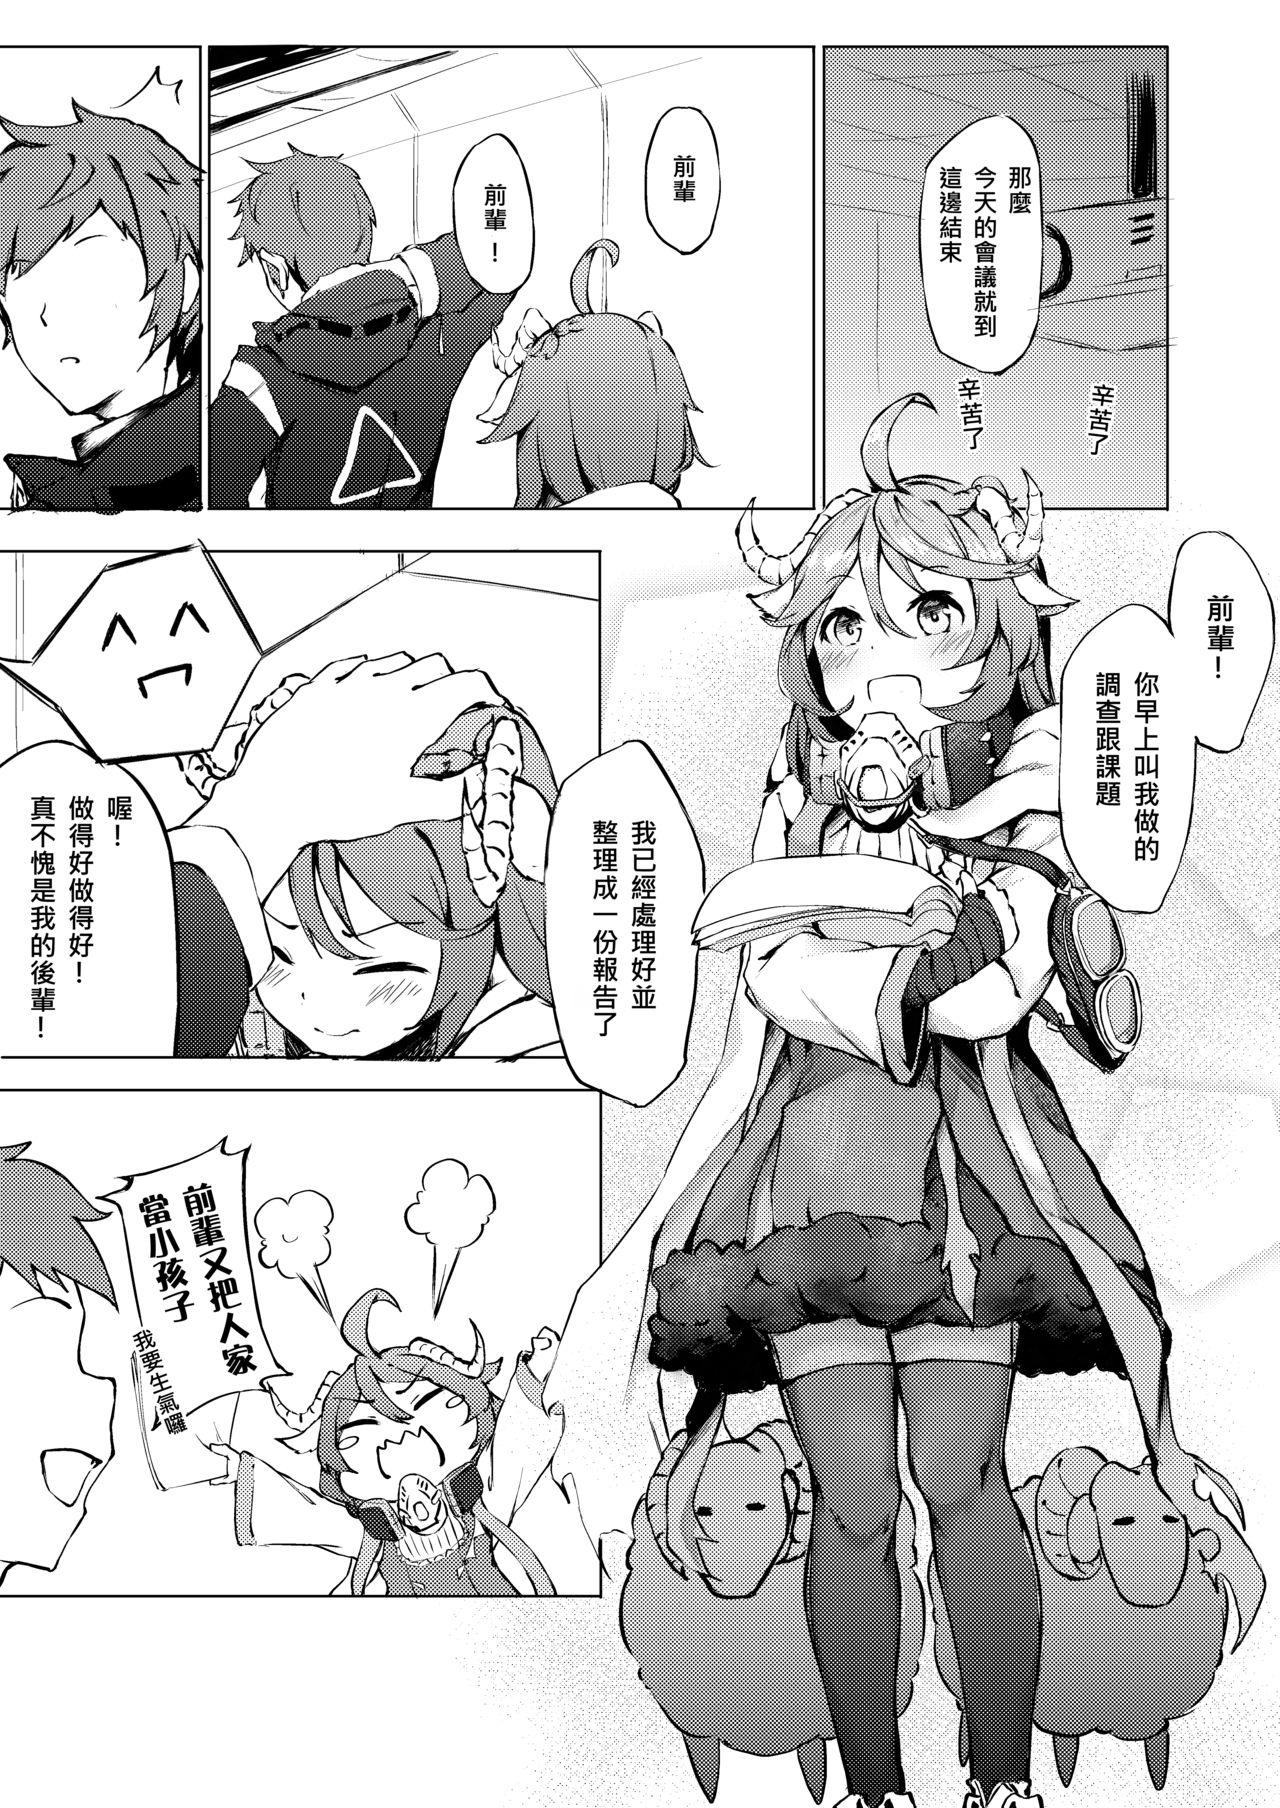 Shemales 不存在的聲音 | The Nonexistence Voice - Arknights Women Fucking - Page 5